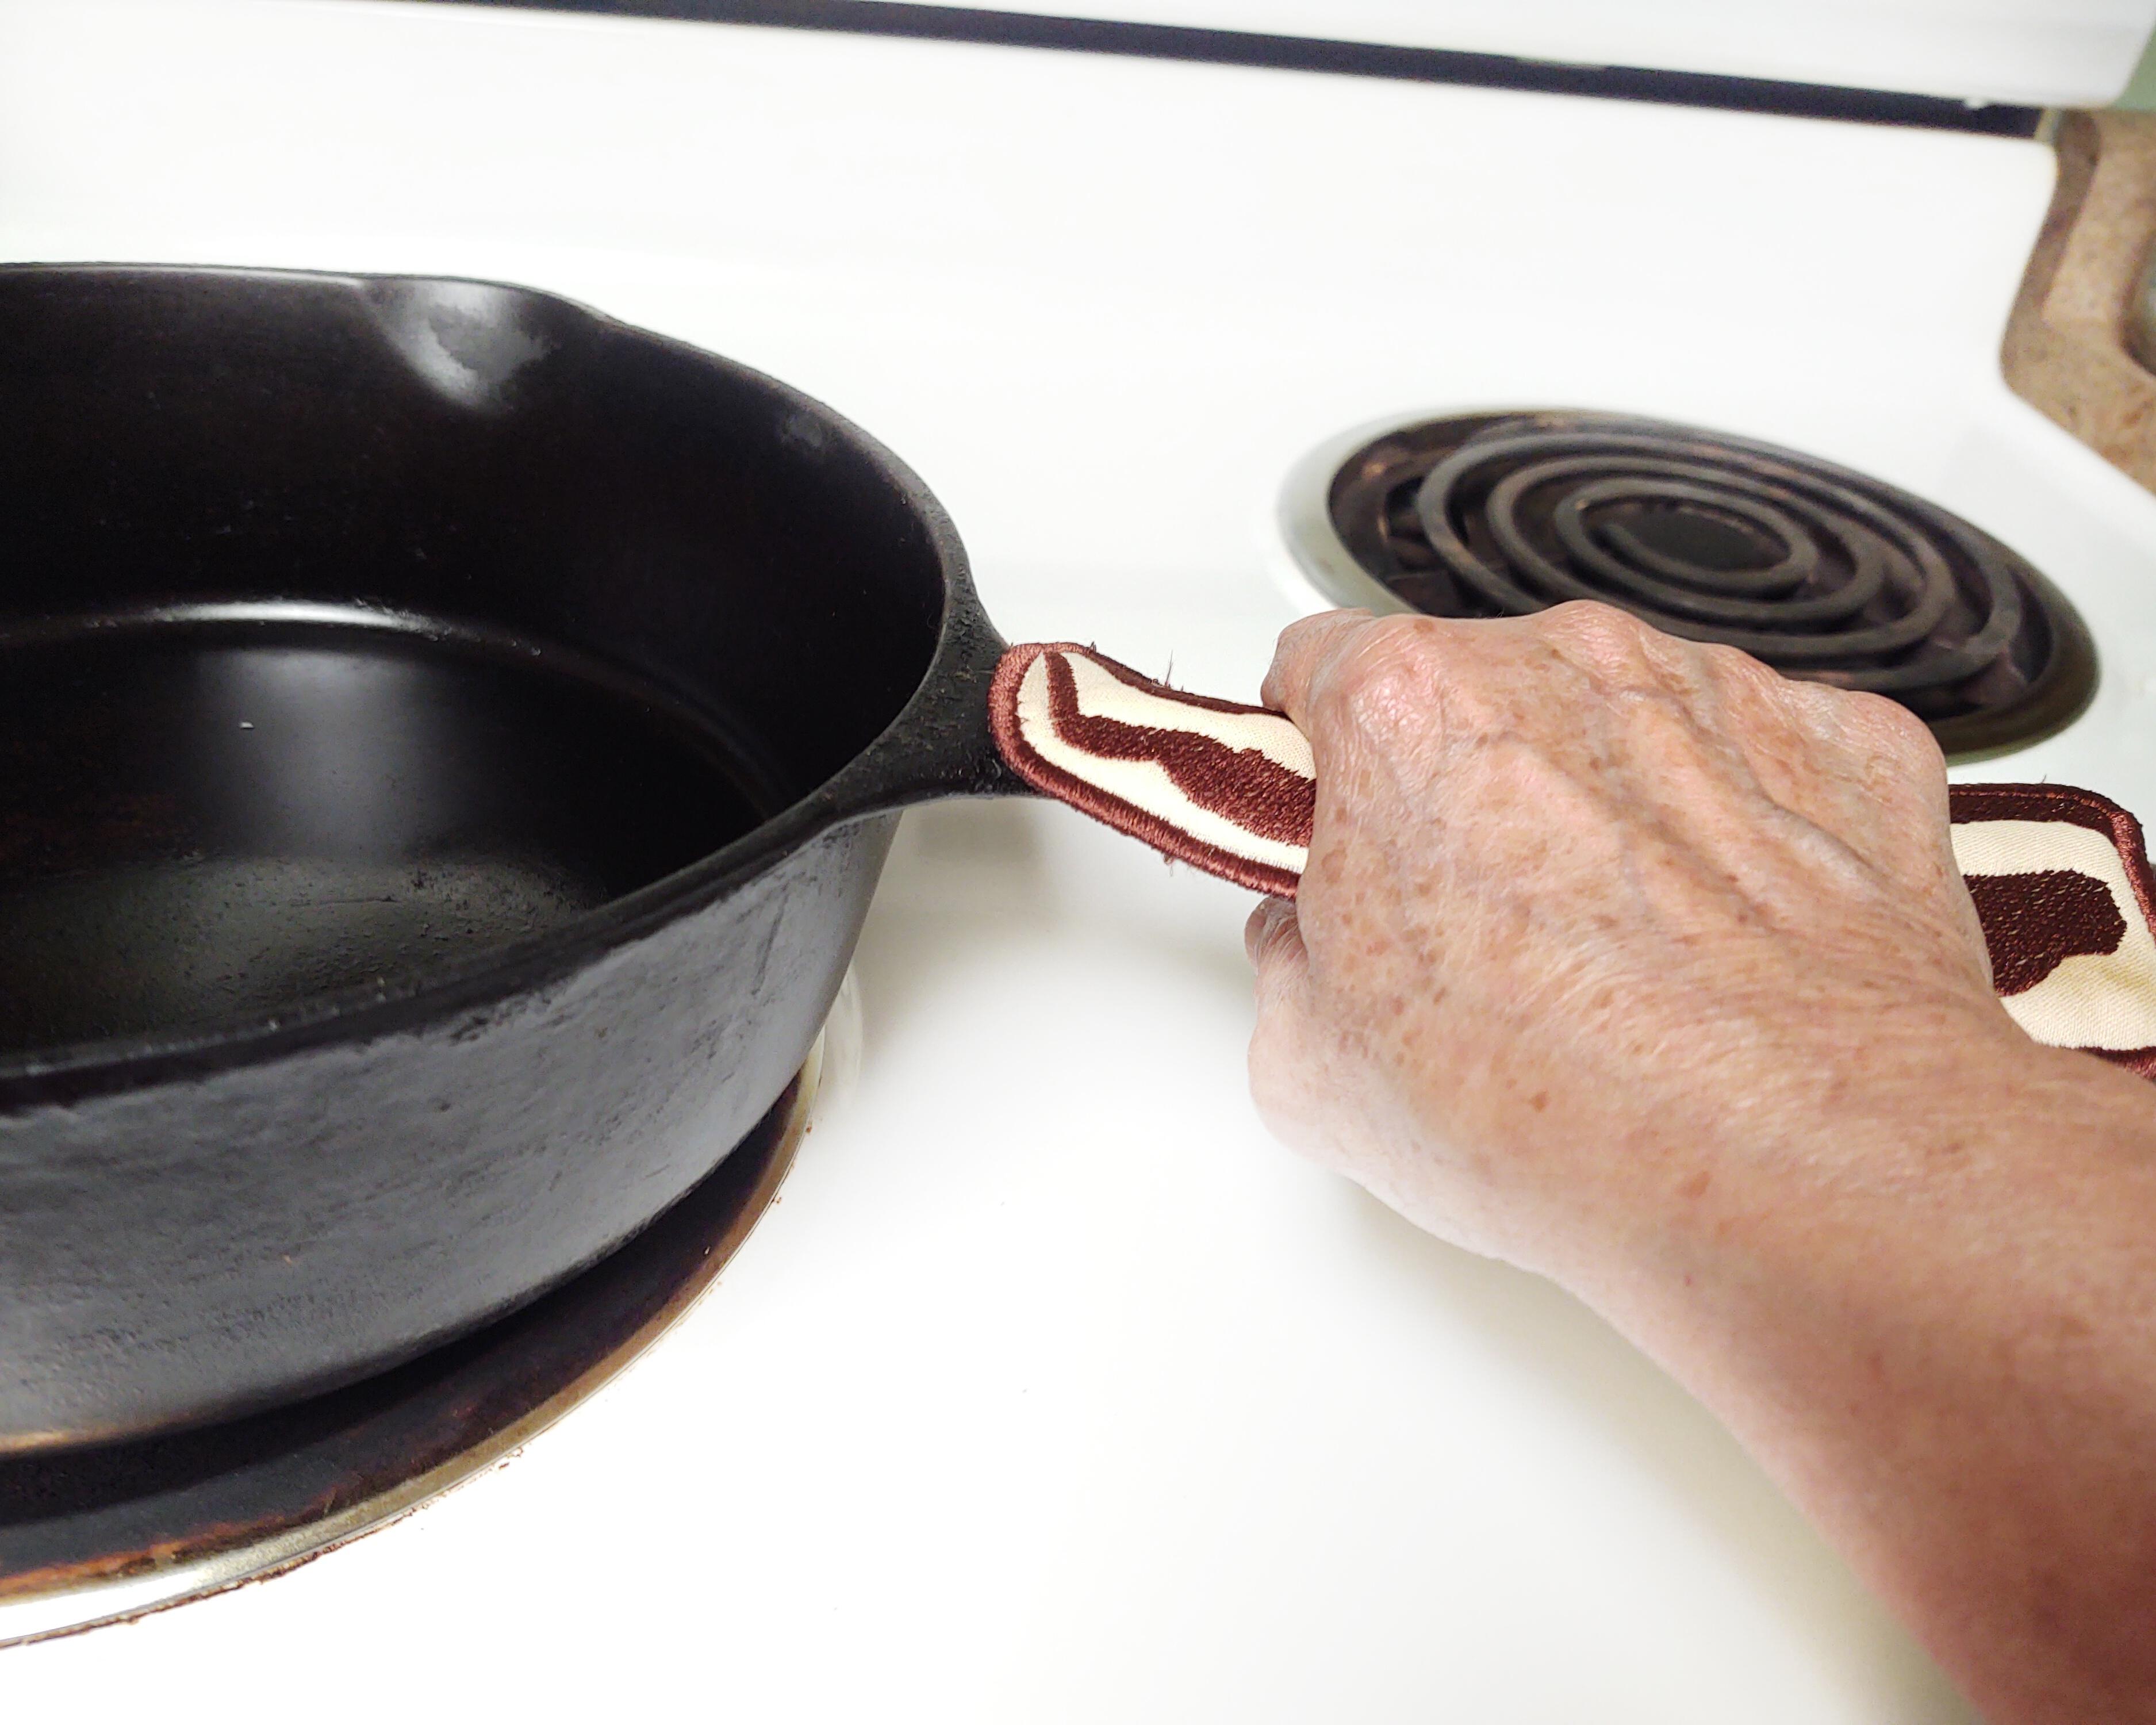 Pan handle sleeve shown in use on a cast iron skillet.